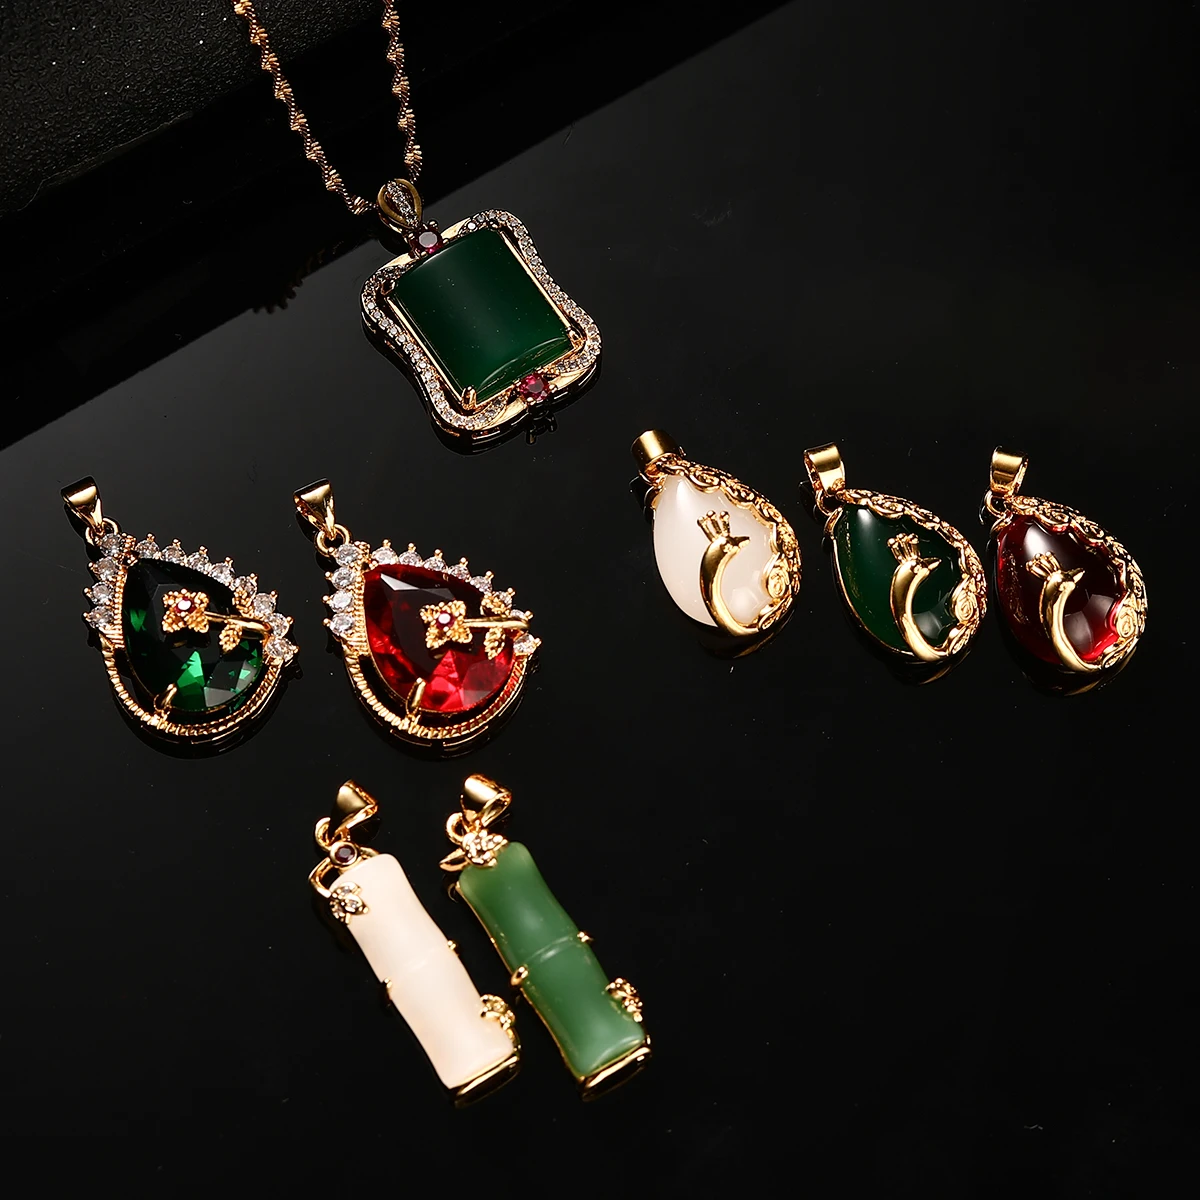 

Bamboo Peacock Flower Green White Red Natural Stone Pendant Necklaces For Women Girls Chinese Cultural Wedding Jewelry